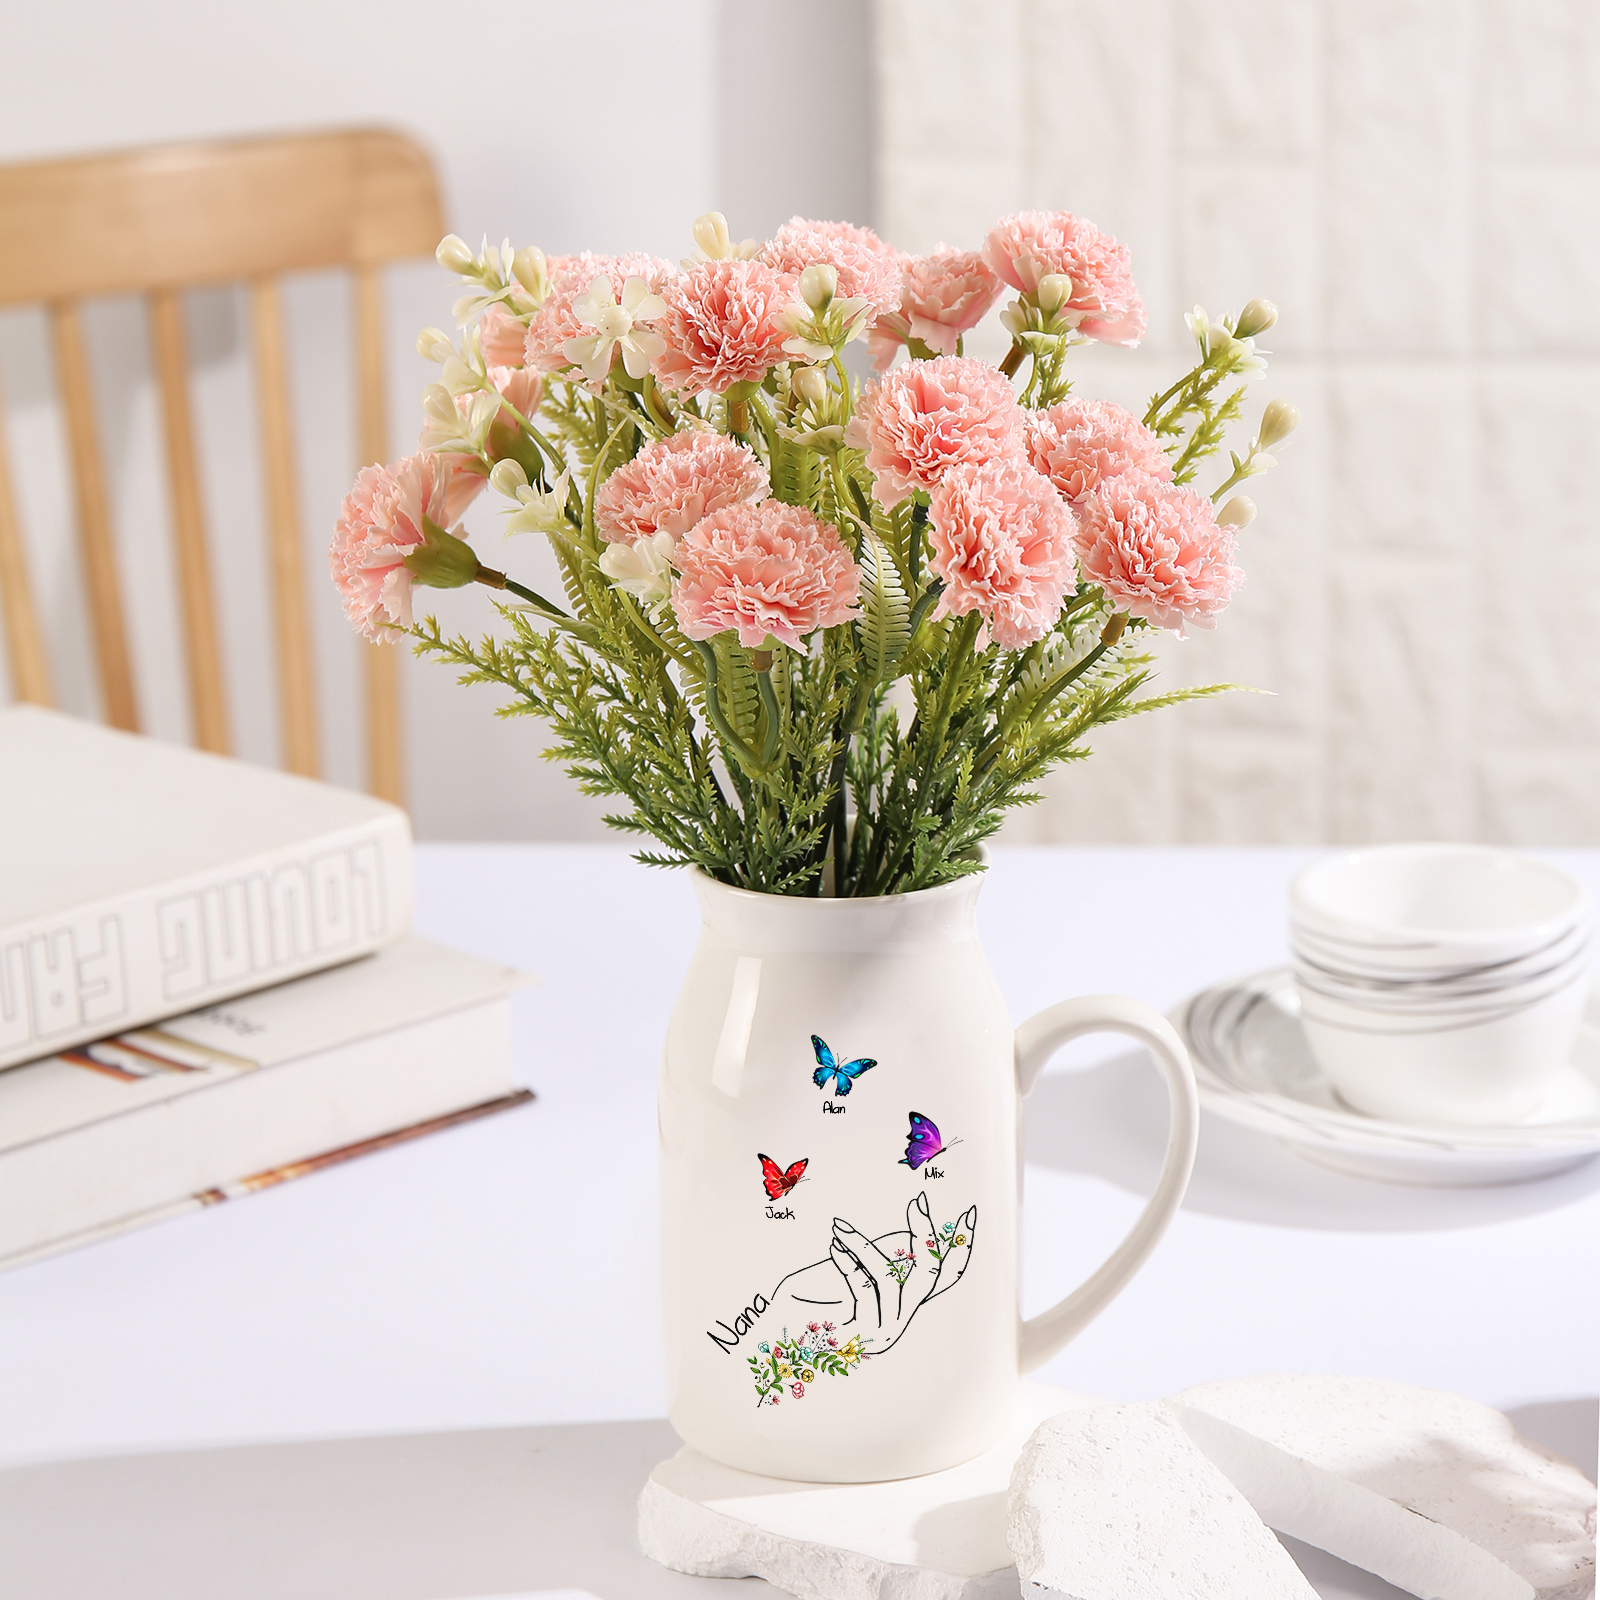 3 Names - Personalized Exquisite Flower Hand Butterfly Style Ceramic Cup With Customizable Names As a Special Gift For Mom